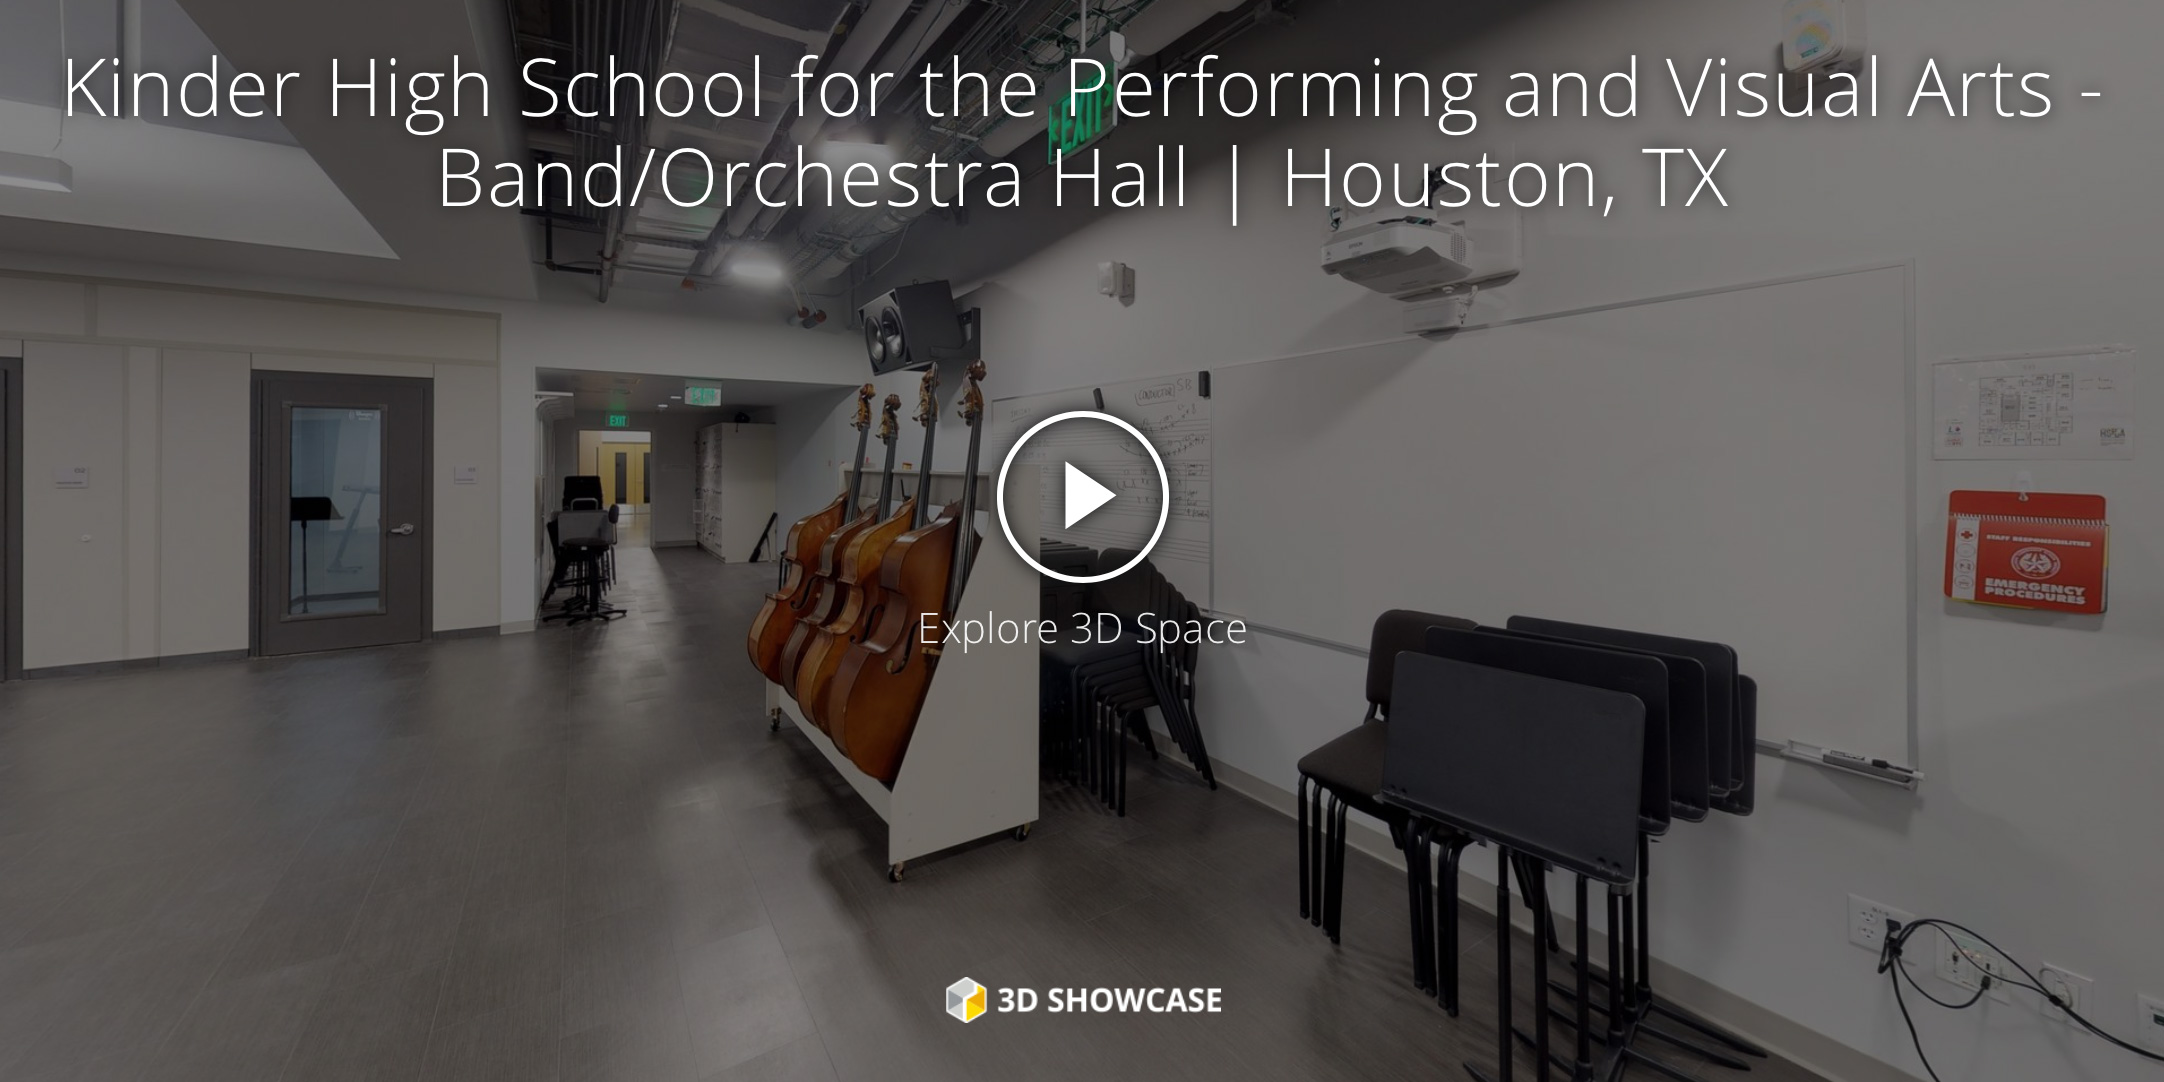 Kinder High School for the Performing and Visual Arts – Band/Orchestra Hall